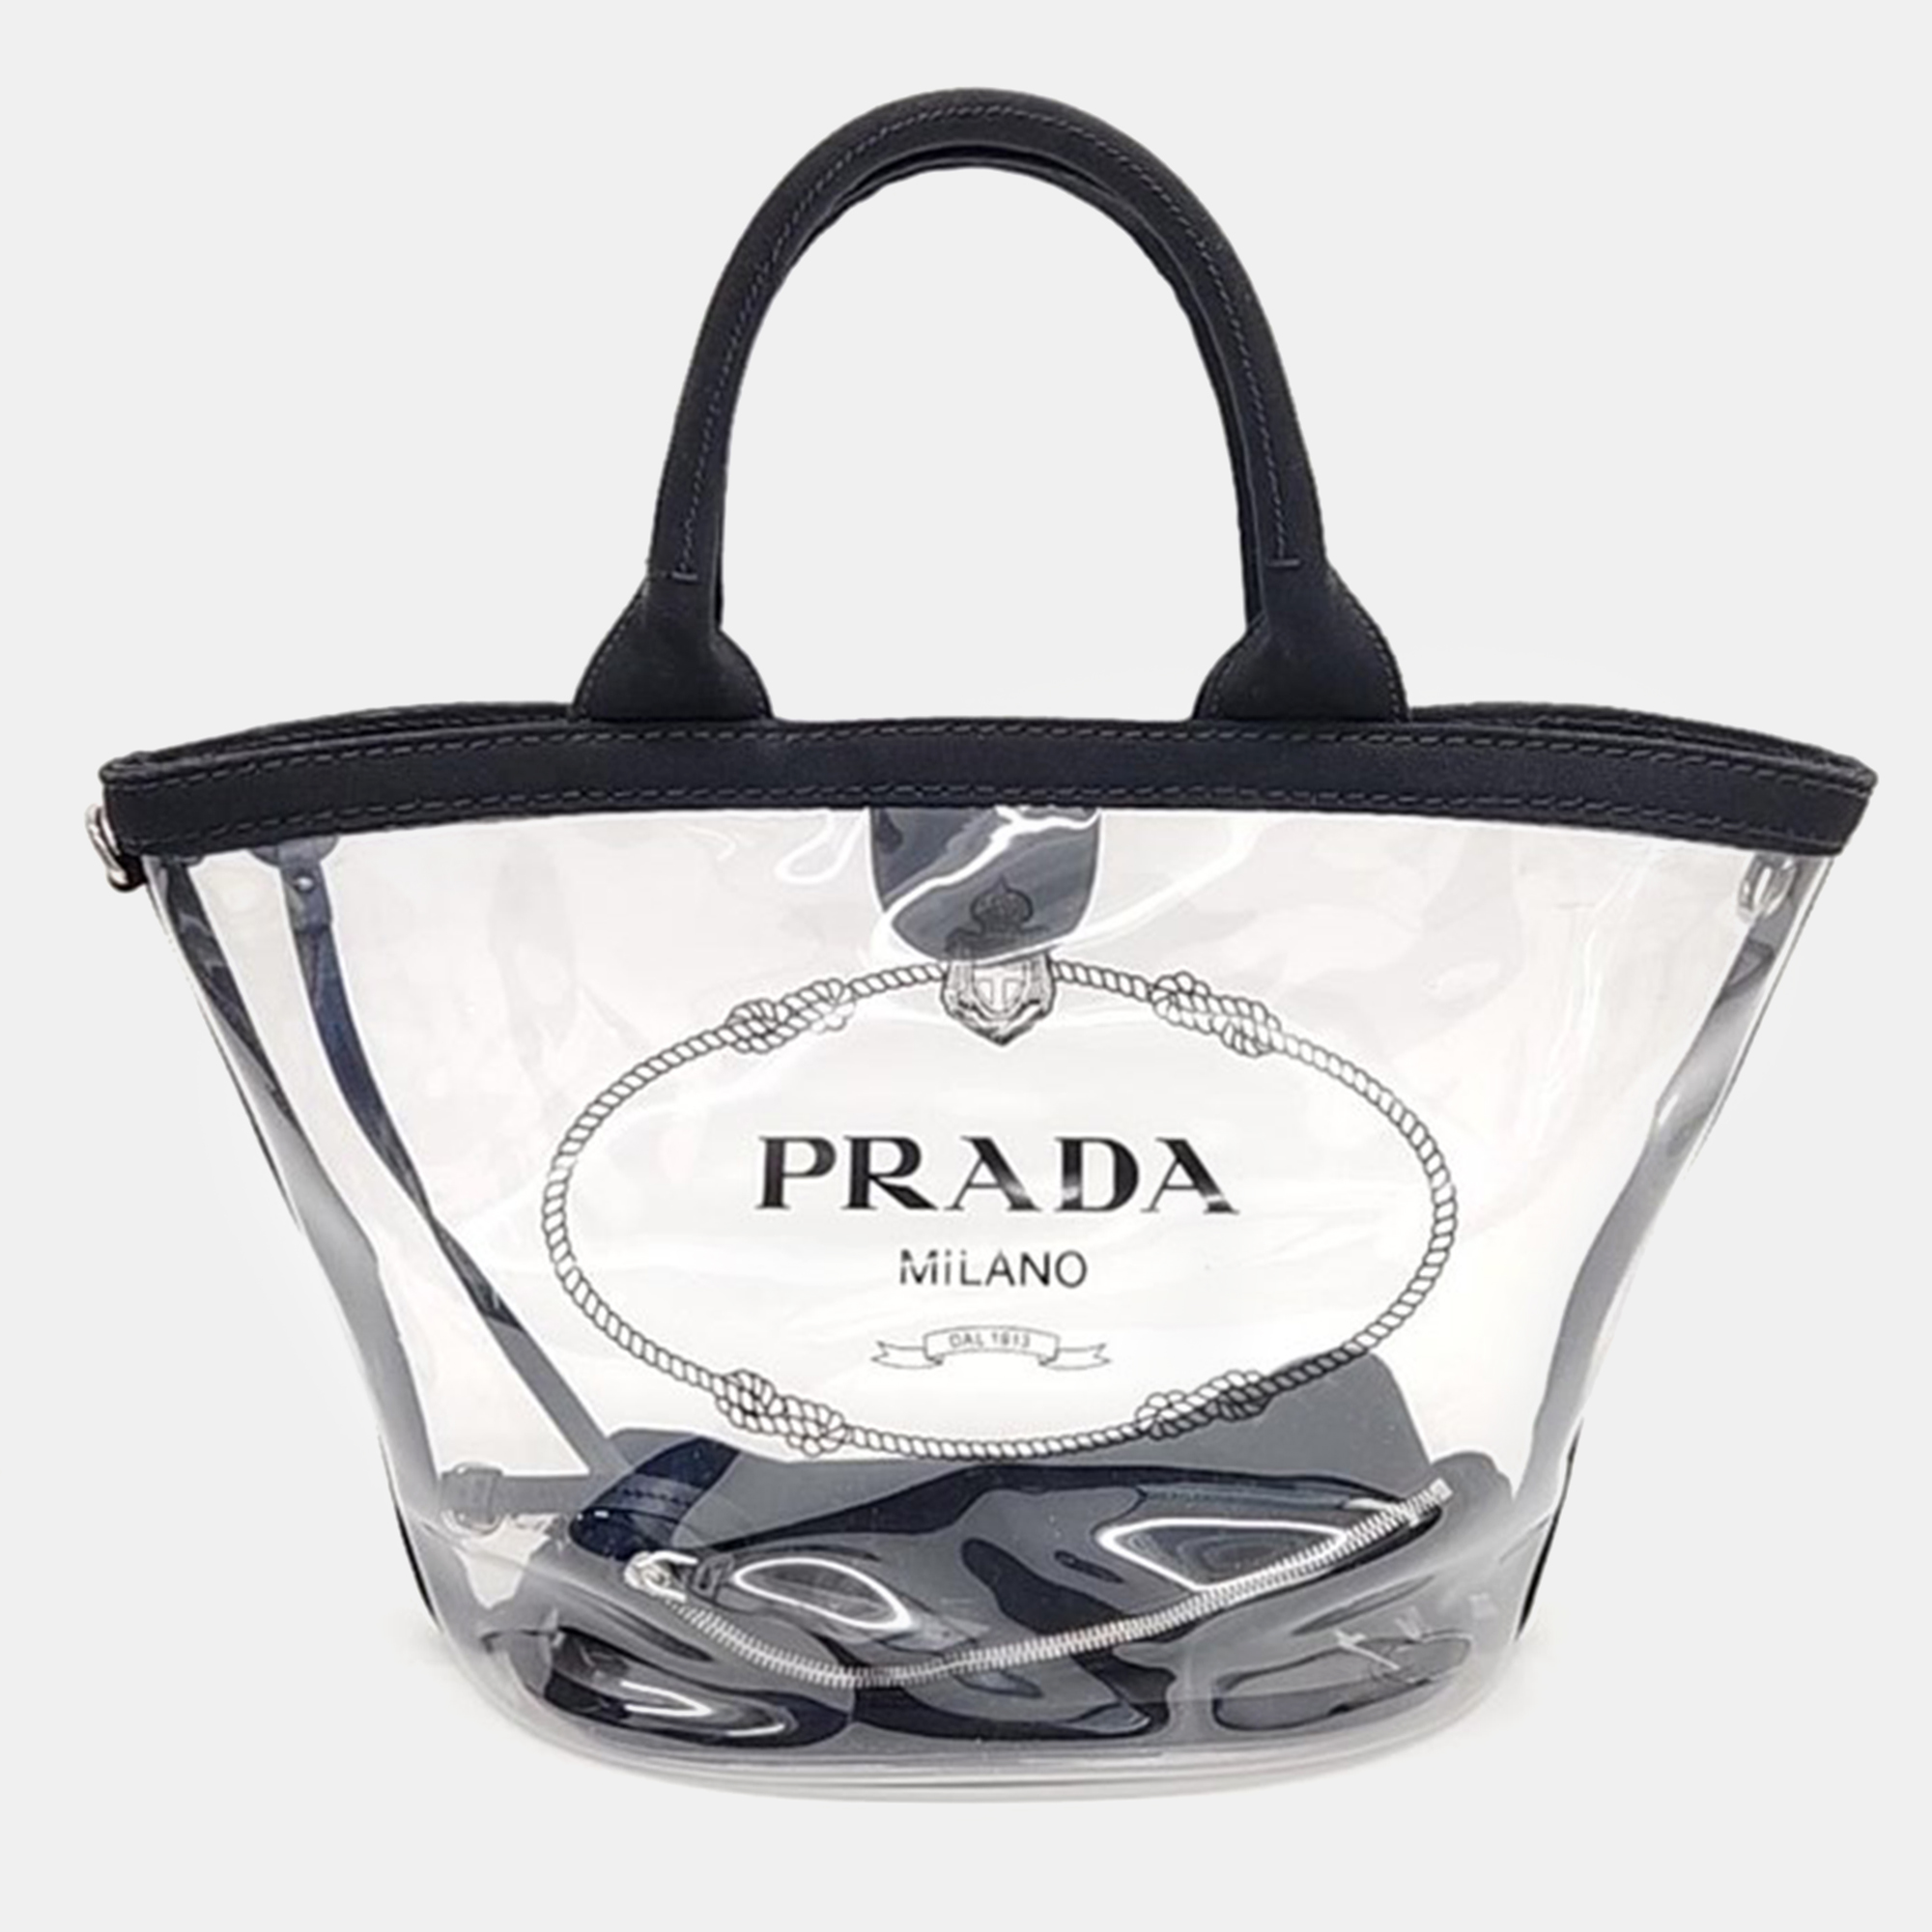 Uncompromising in quality and design this Prada bag is a must have in any wardrobe. With its durable construction and luxurious finish its the perfect accessory for any occasion.